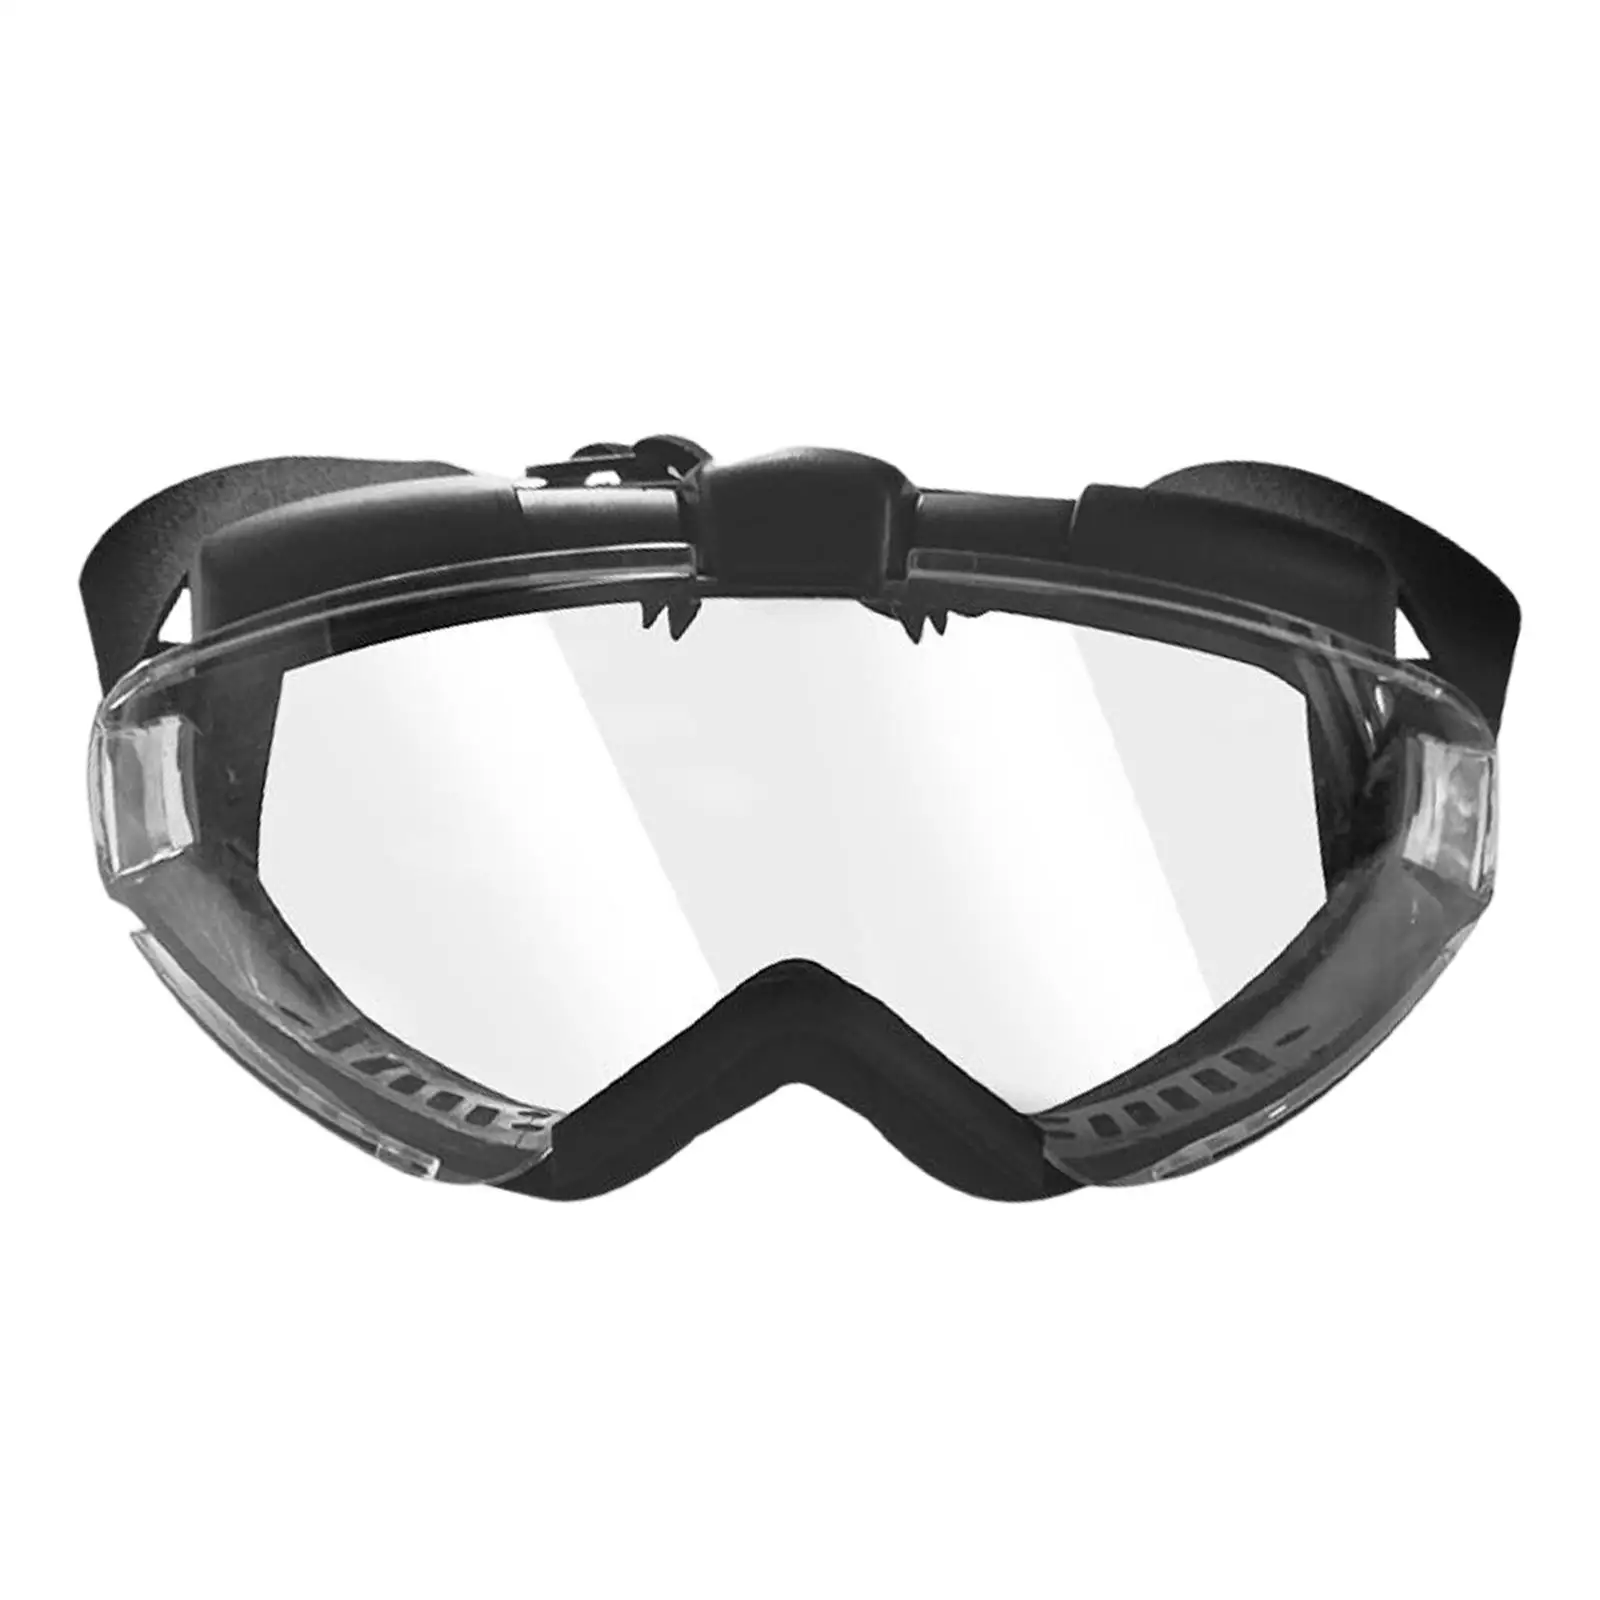 Outdoor Glasses Eye Protection with Adjustable Strap Men Women Windproof Goggles